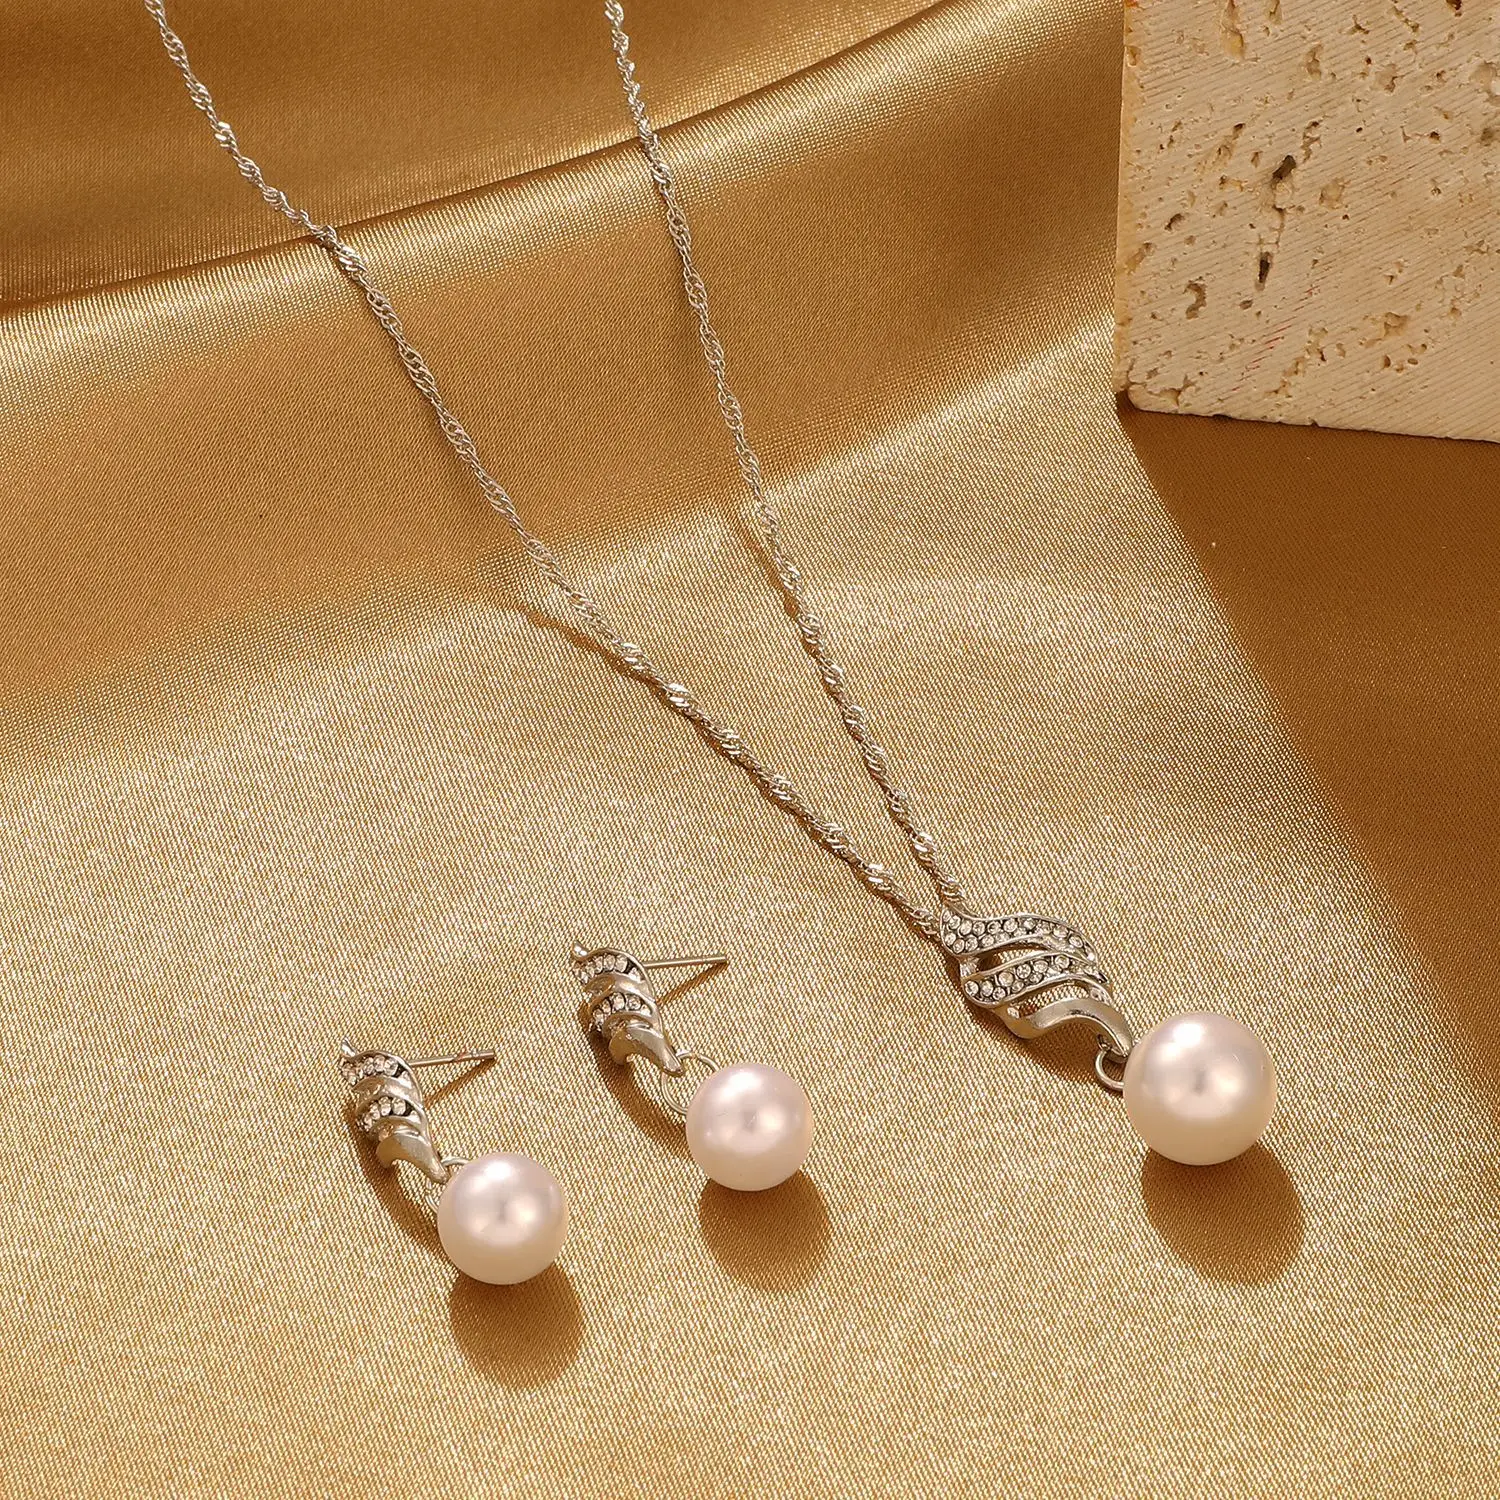 YKshop Pearl Necklace for Women 8 Layer Faux Pearl Necklace Earrings Set -  Elegant Trendy Aesthetic Wedding Party Chain for Girls Teen Bride